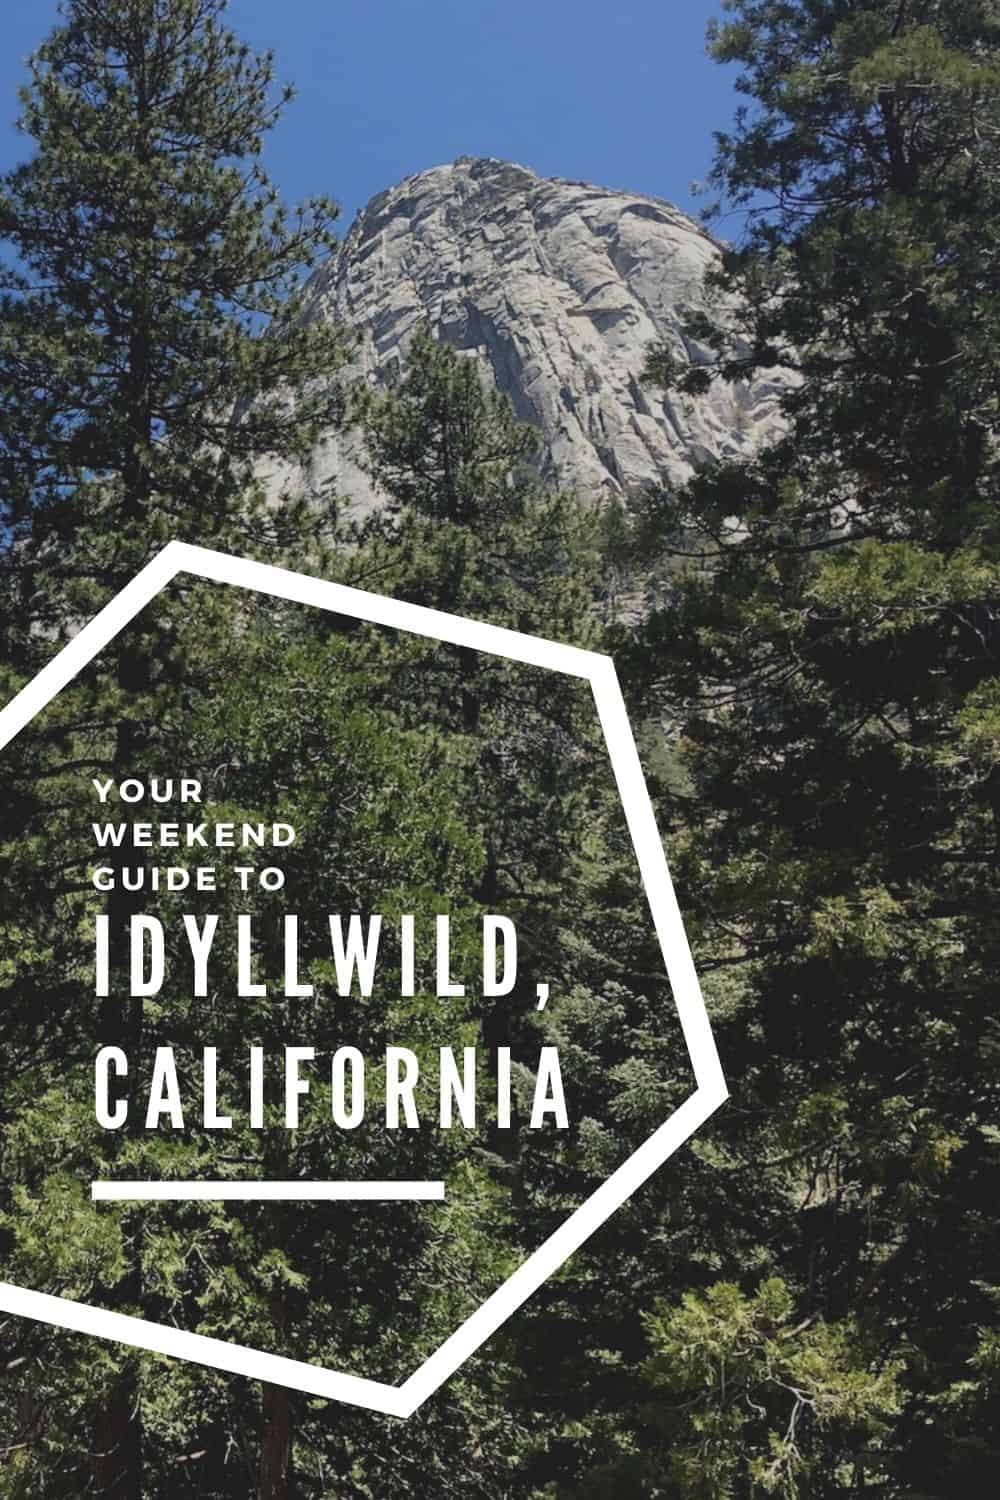 Click image for what to do in Idyllwild, CA